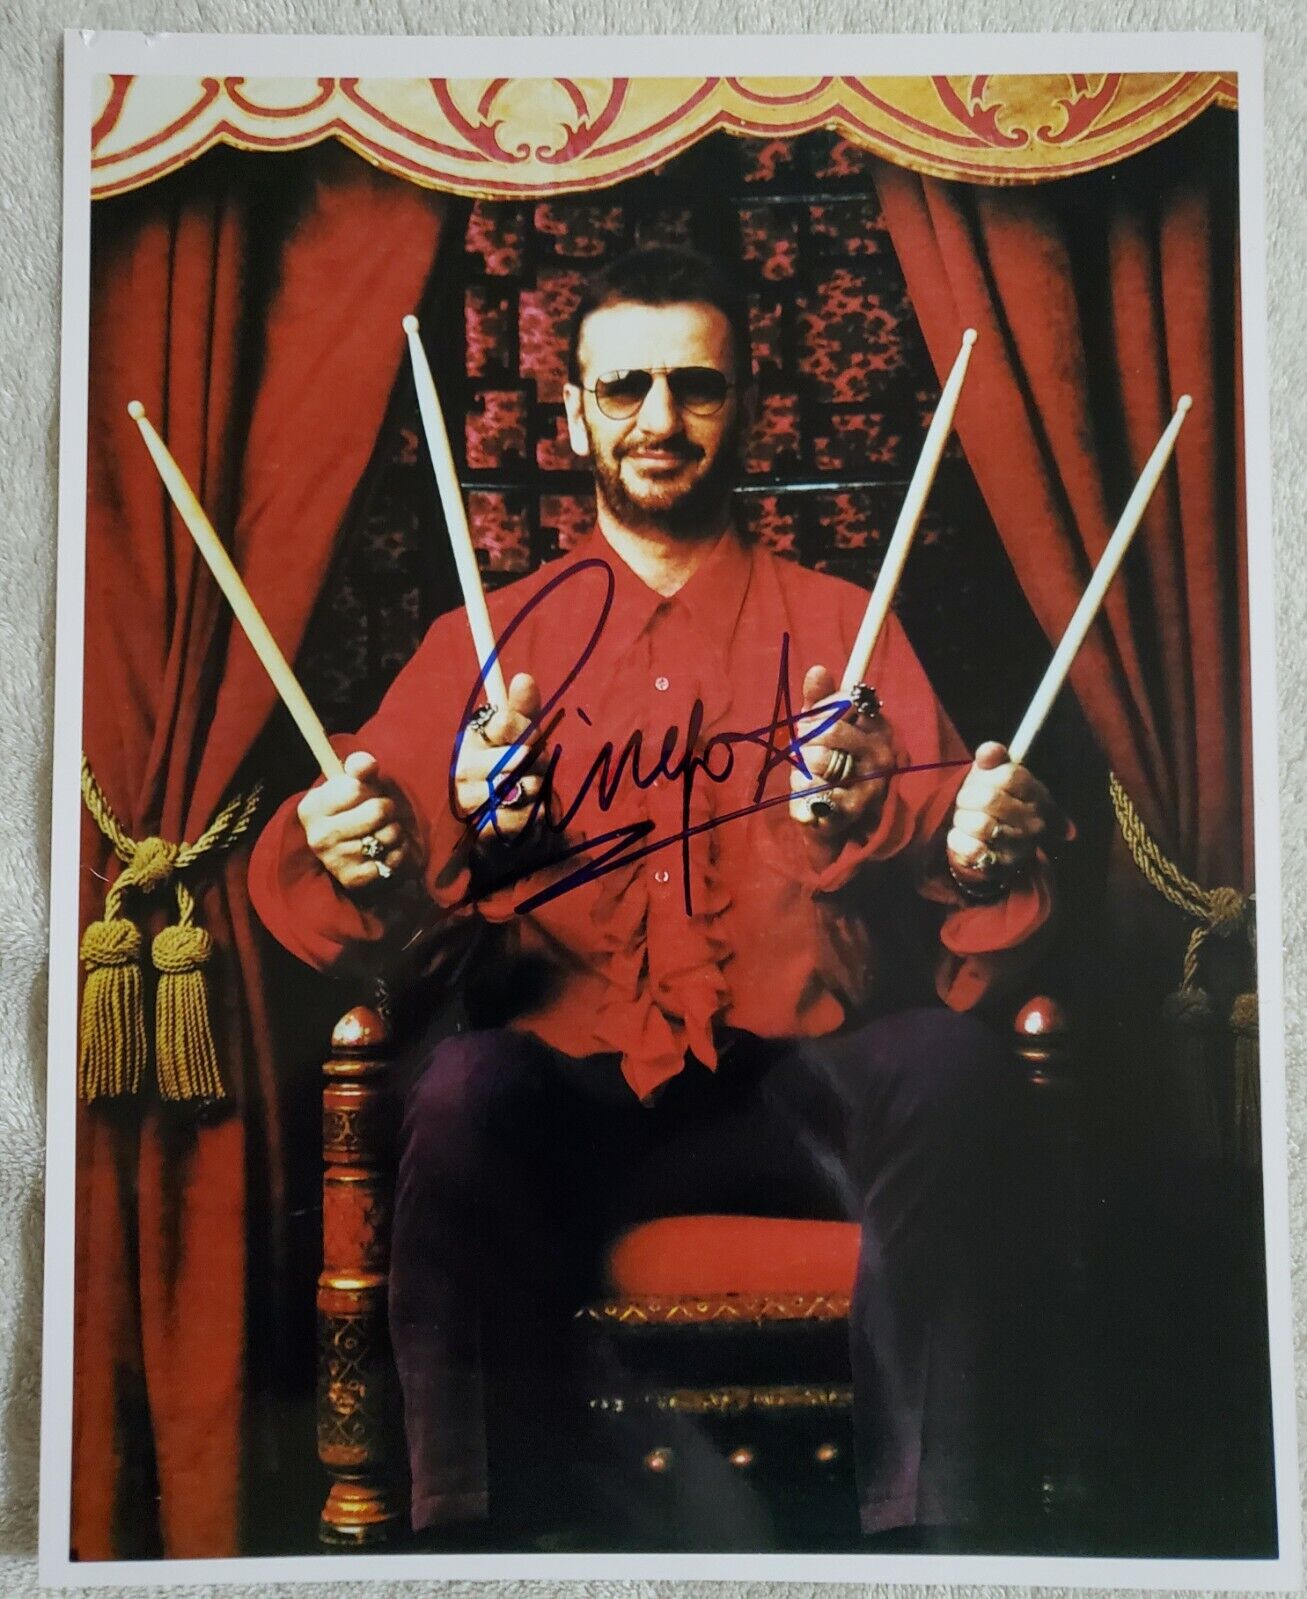 RINGO STARR SIGNED AUTOGRAPHED 8x10 Photo Poster painting BAS BECKETT COA THE BEATLES FAB 4